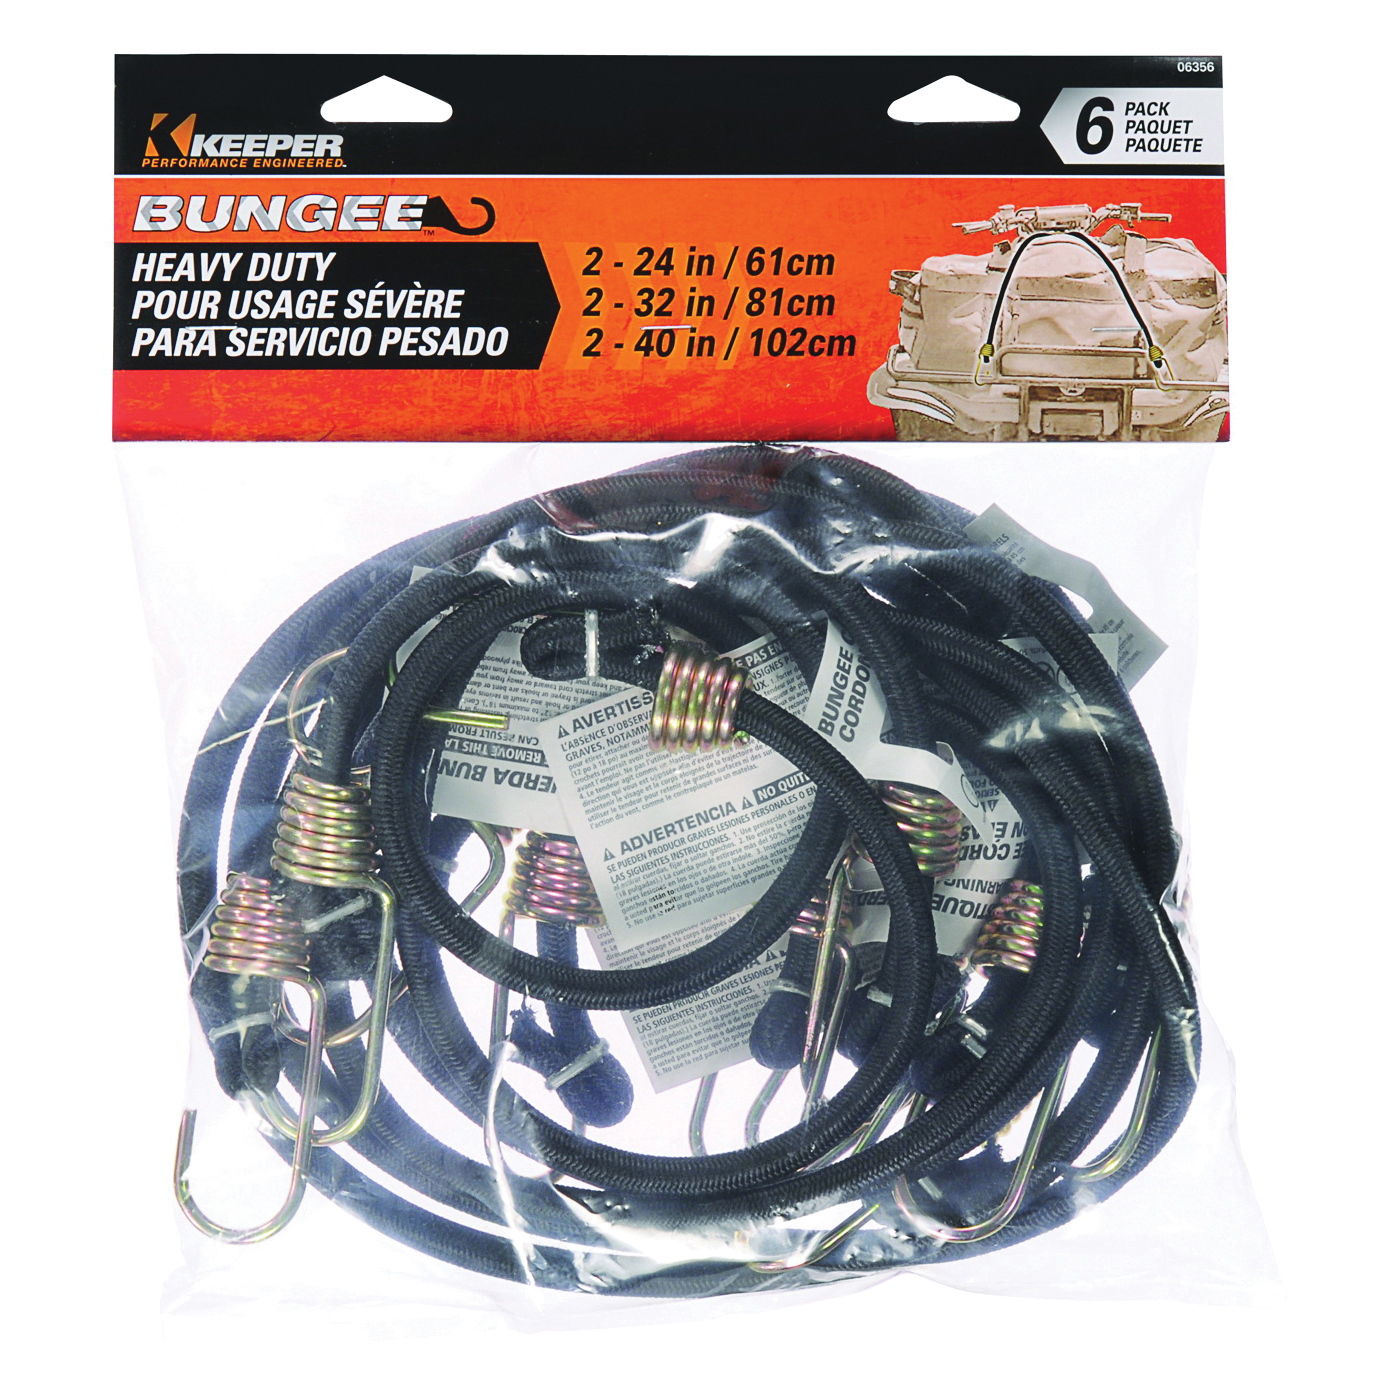 Keeper 06356 Bungee Cord, Rubber, Hook End - 1